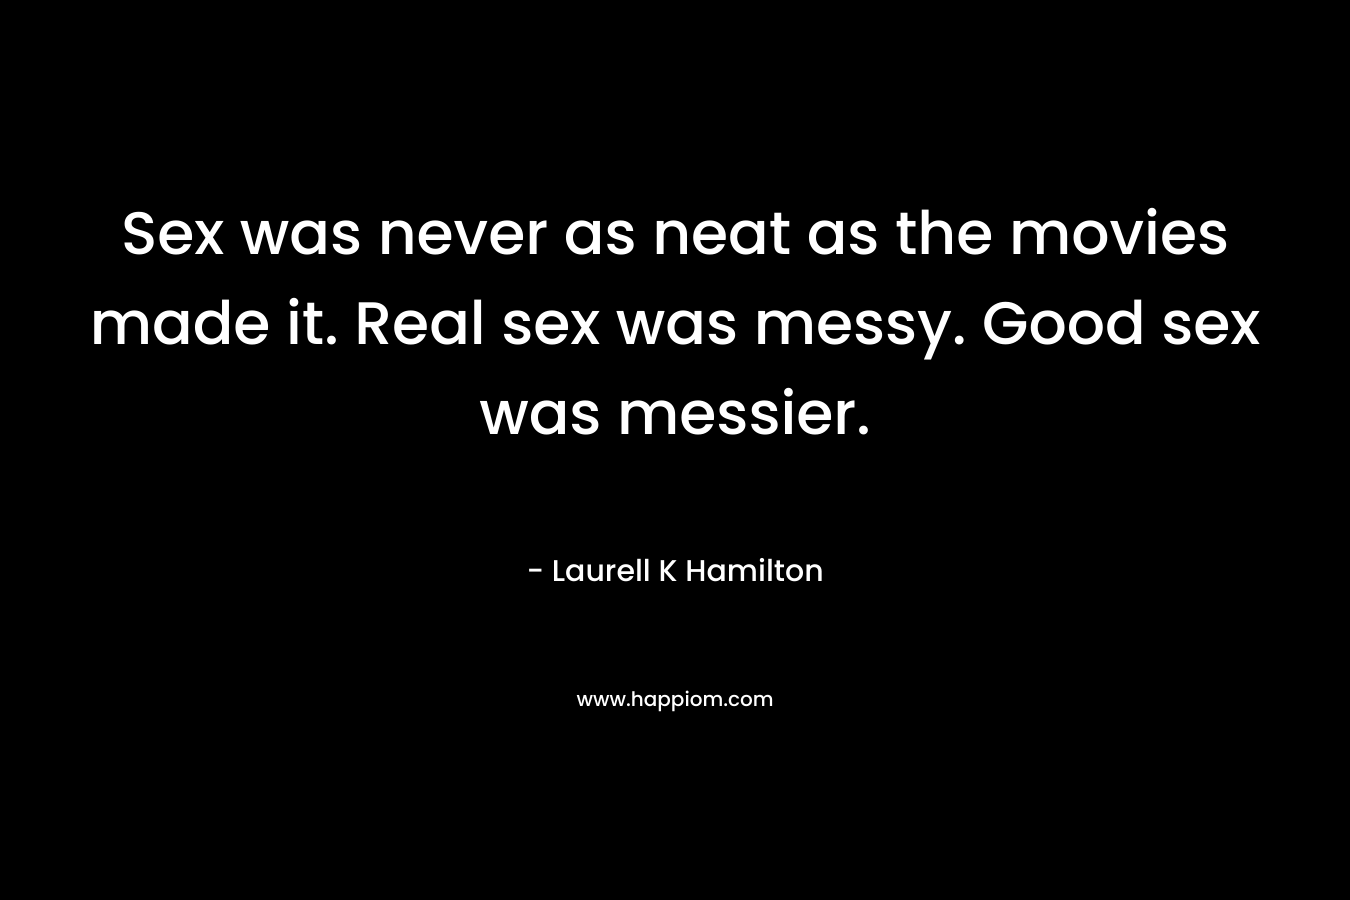 Sex was never as neat as the movies made it. Real sex was messy. Good sex was messier.